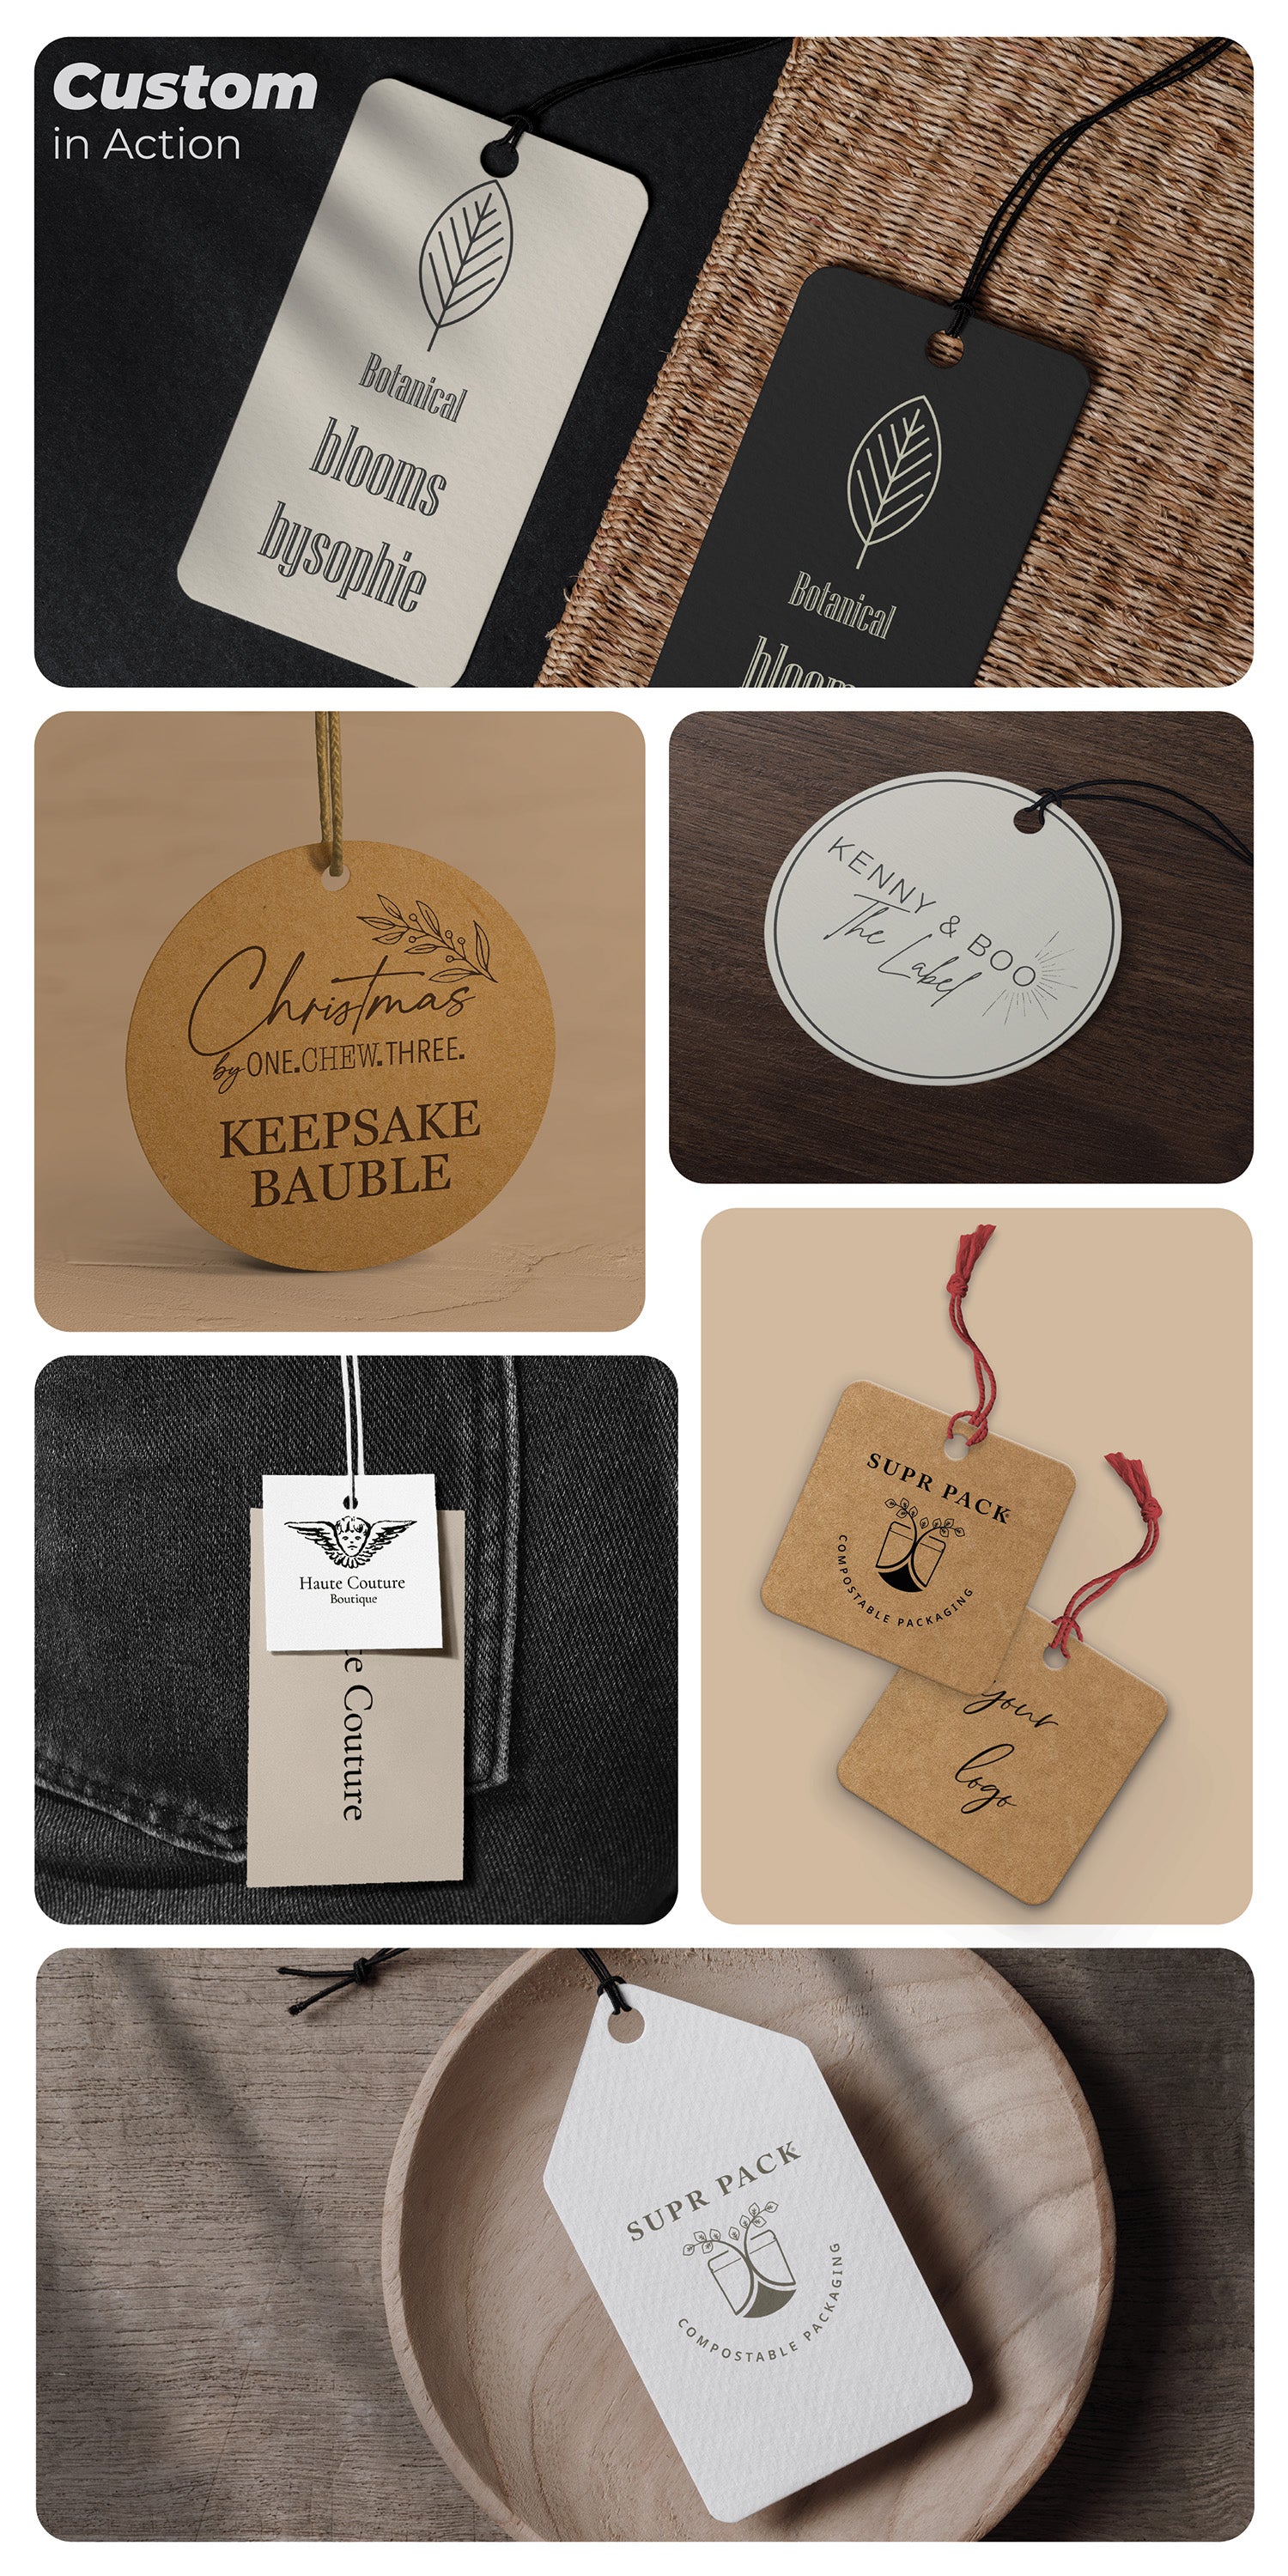 Tags | Swing Tag | Earring Tag | Tags in Australia | Eco-Friendly Packaging | Sustainable Product